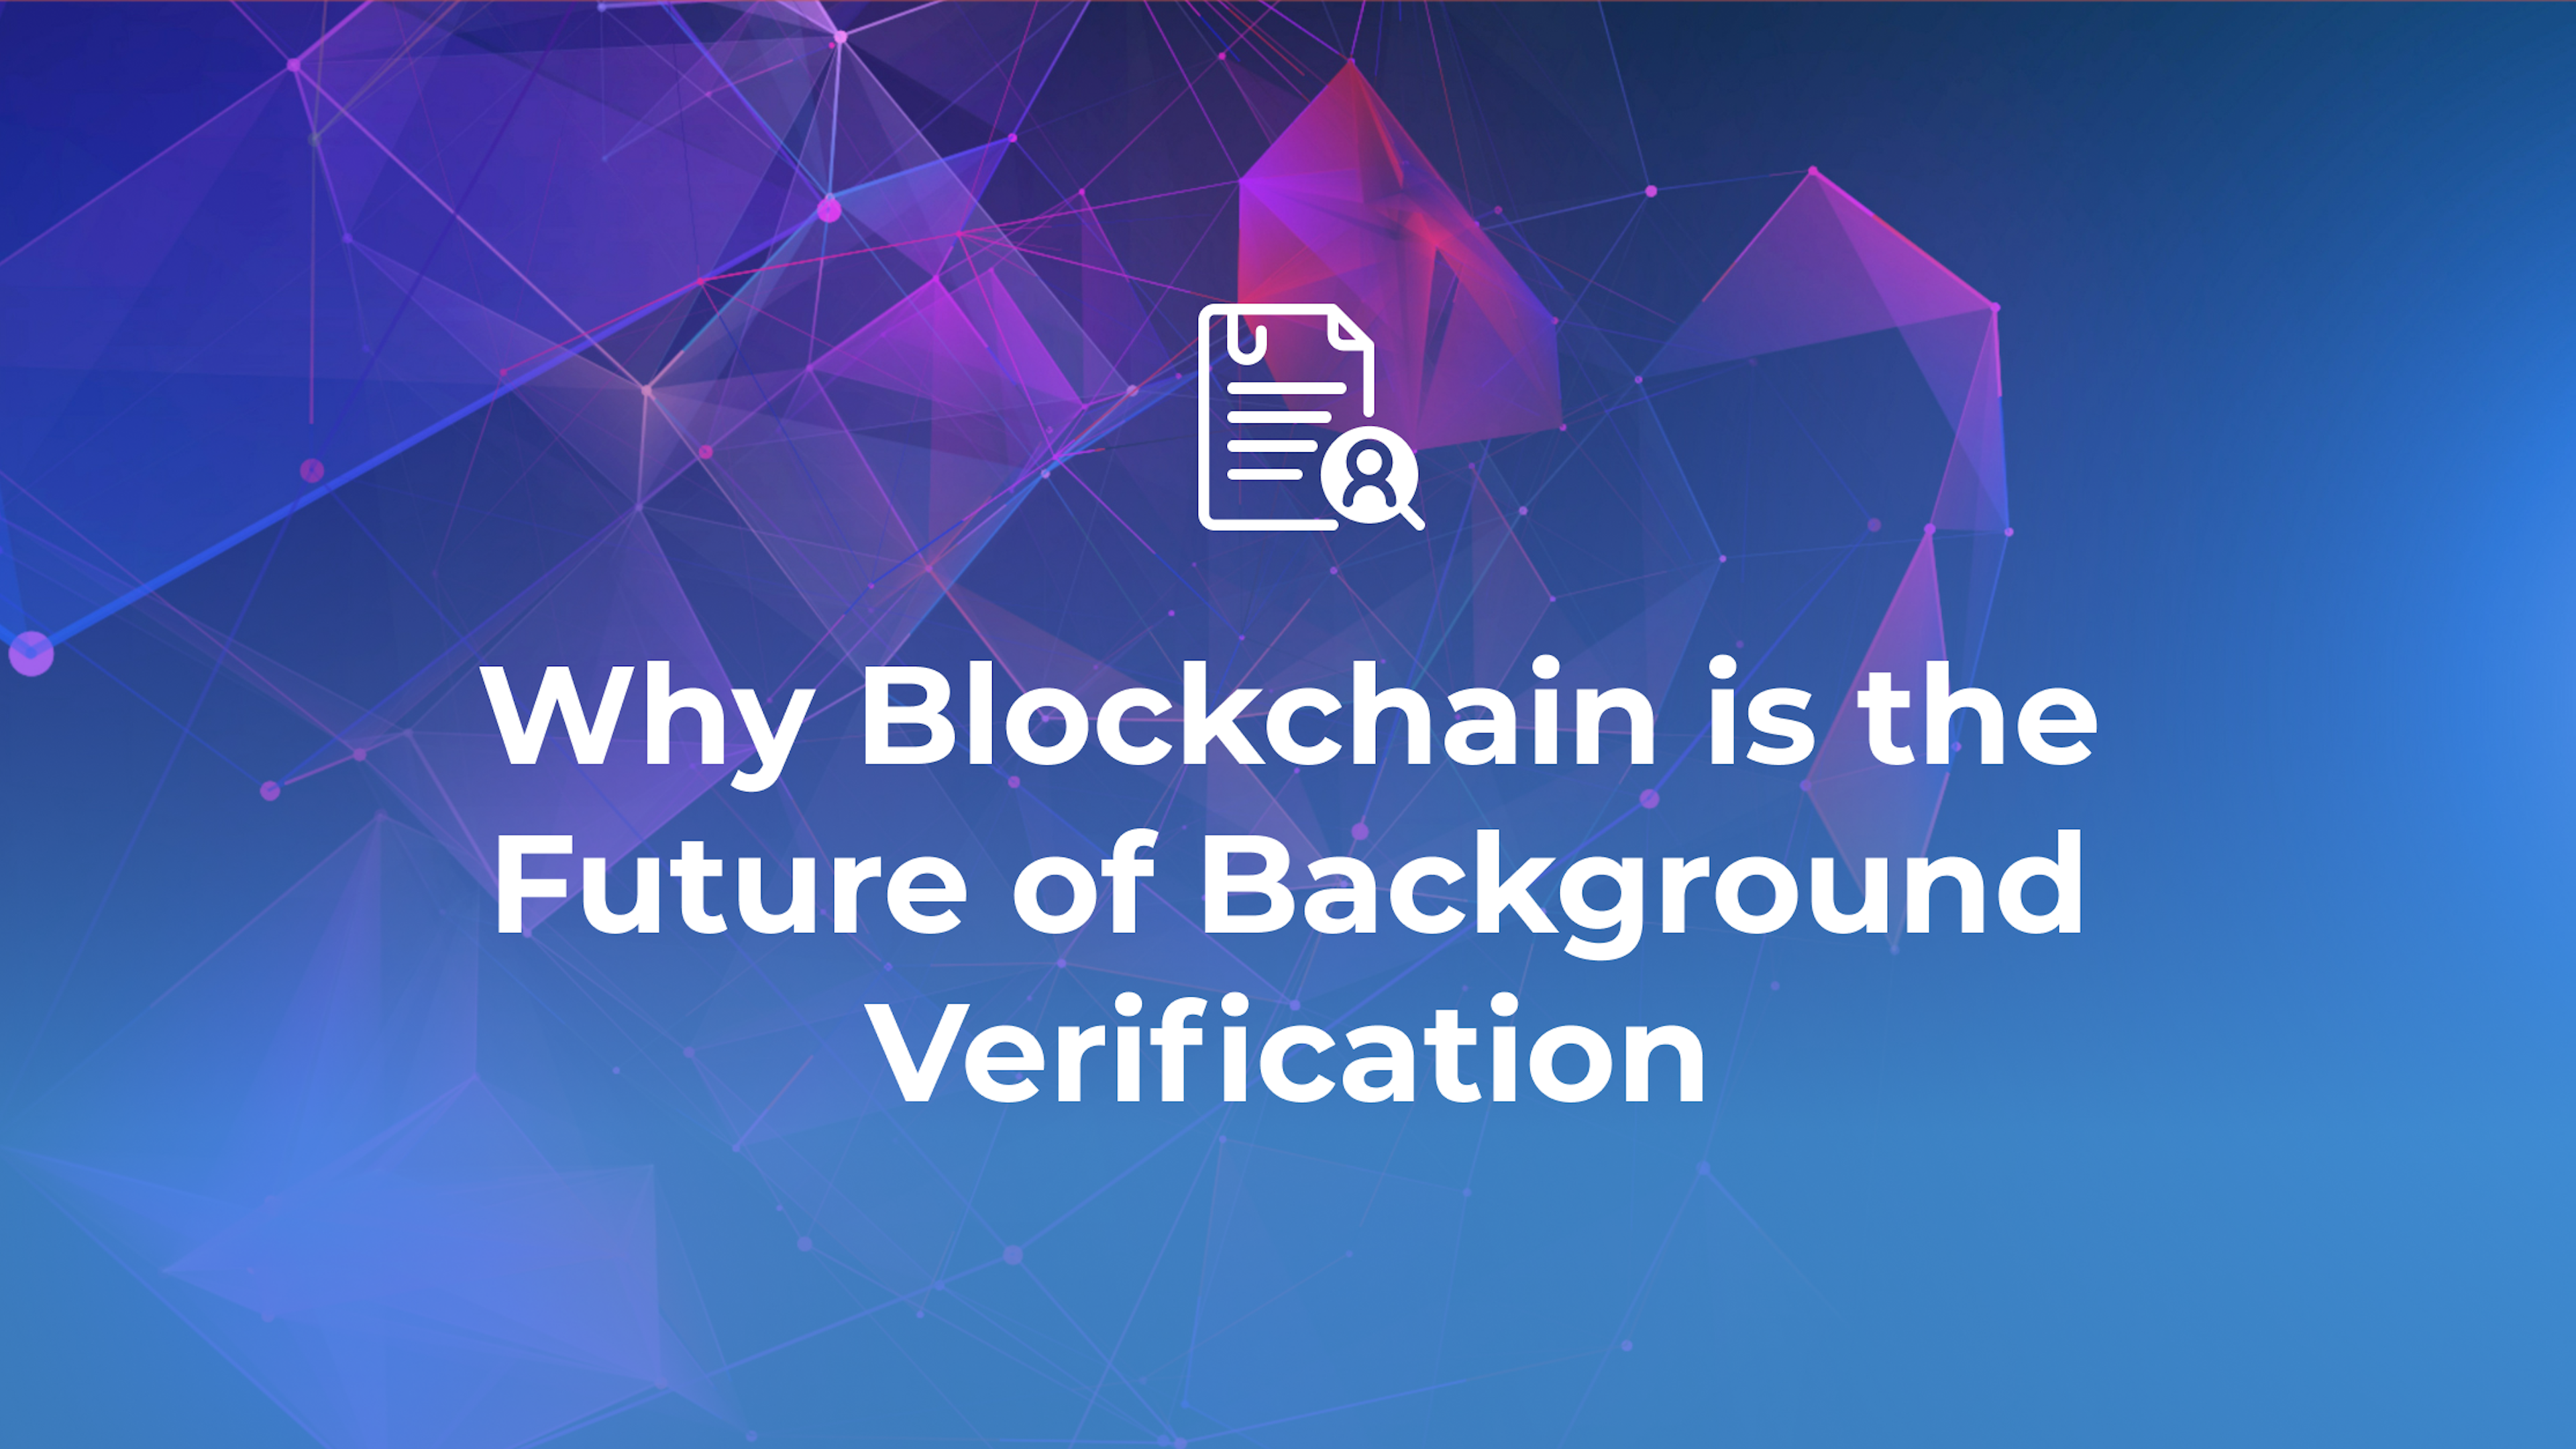 Why Blockchain is the Future of Background Verification